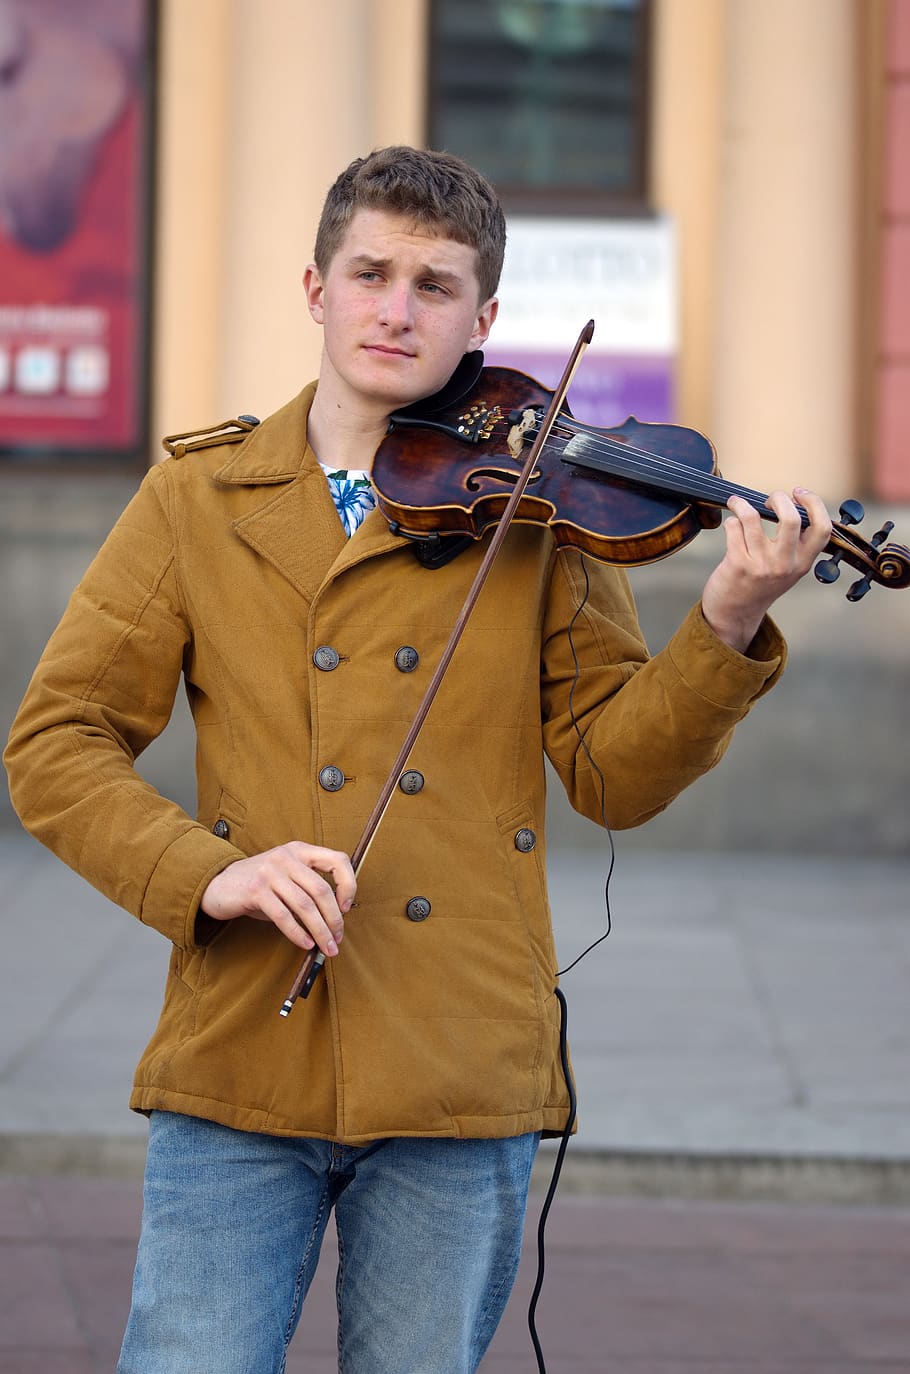 boy, man, young, street, urban, city, singing, violin, the person, adult